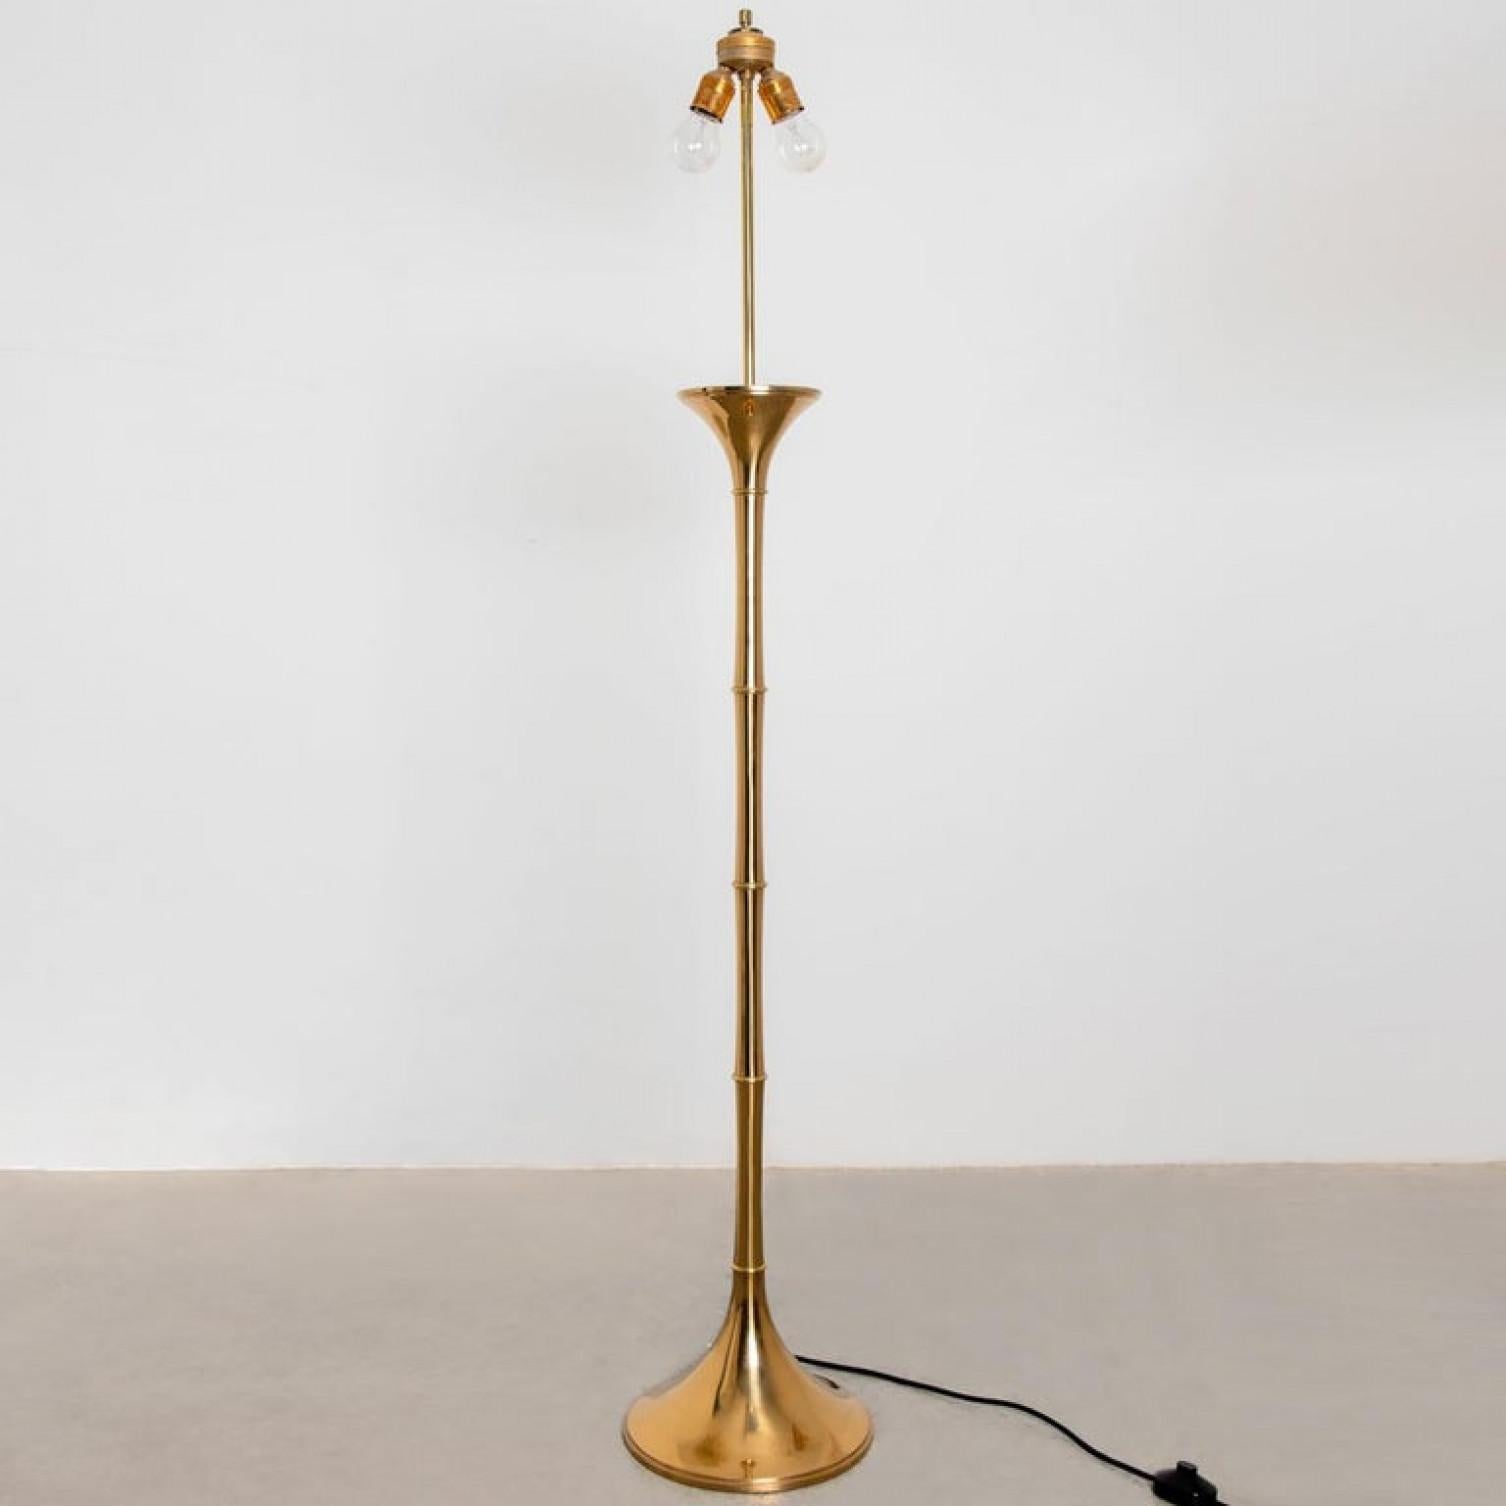 Dutch Pair of Table and Floor Lamp Designed by Ingo Maurer, 1968 For Sale